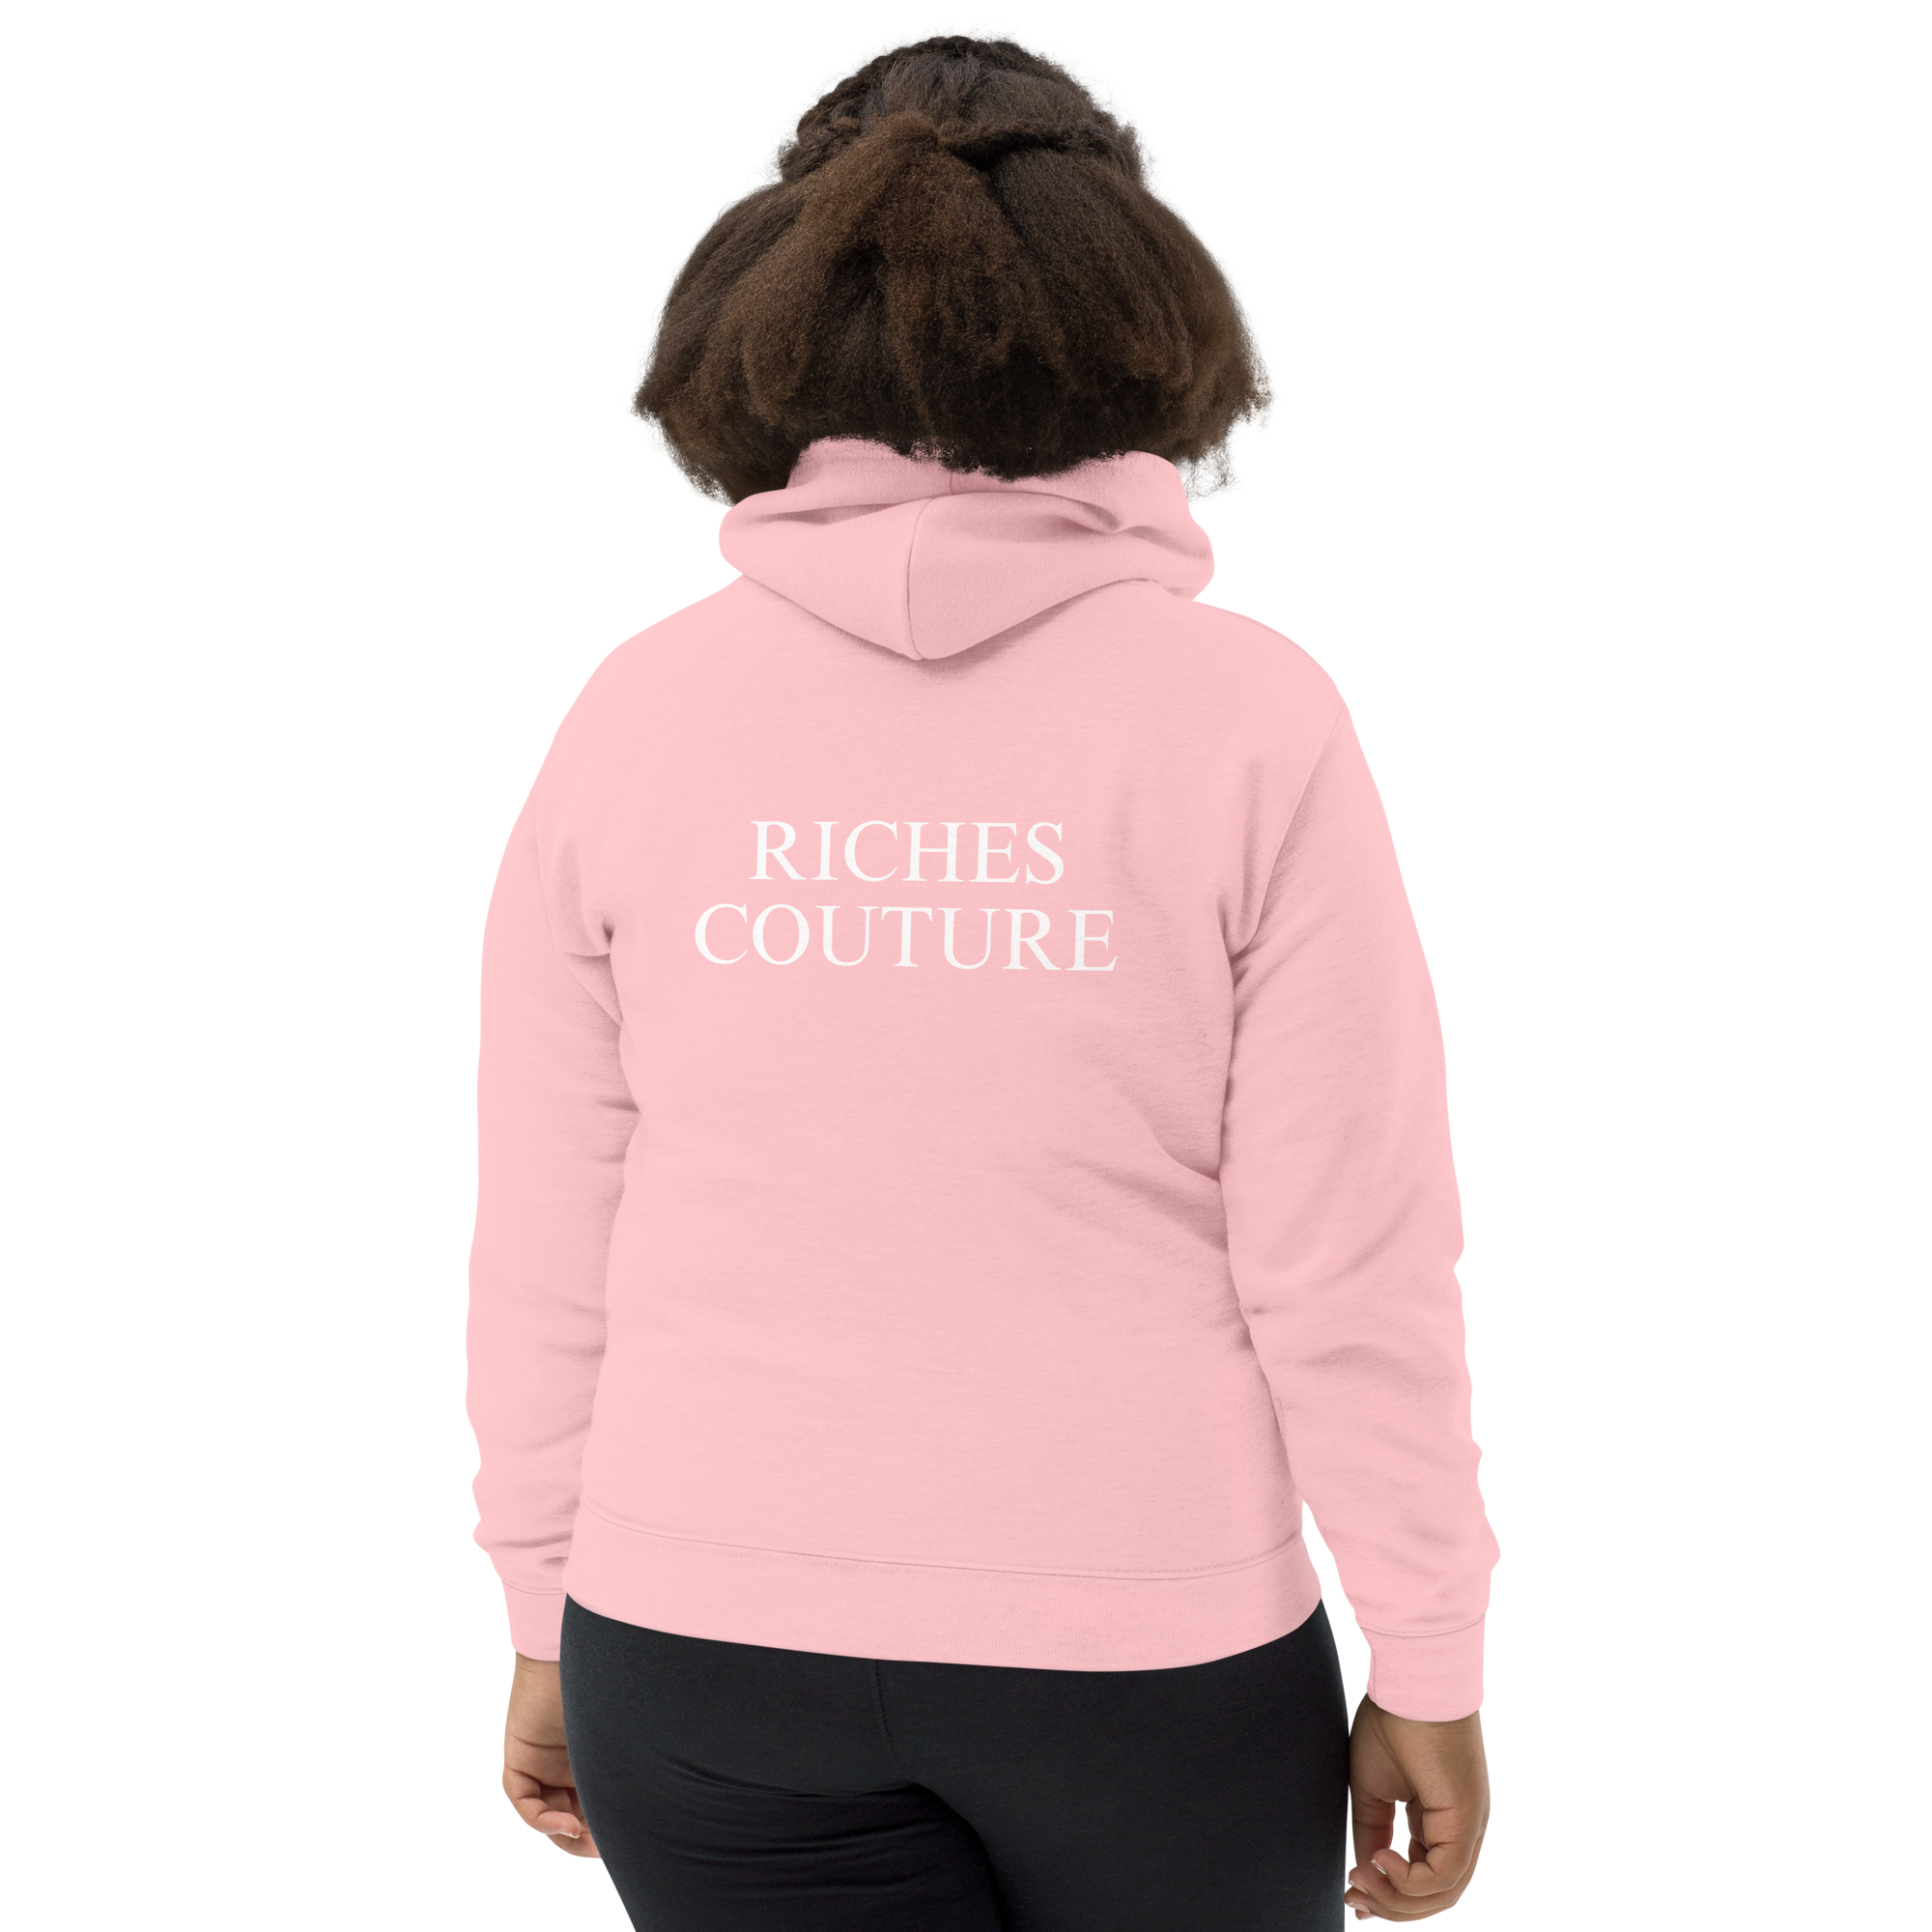 Riches Couture Girls Comfort kids’ hoodie in light pink.